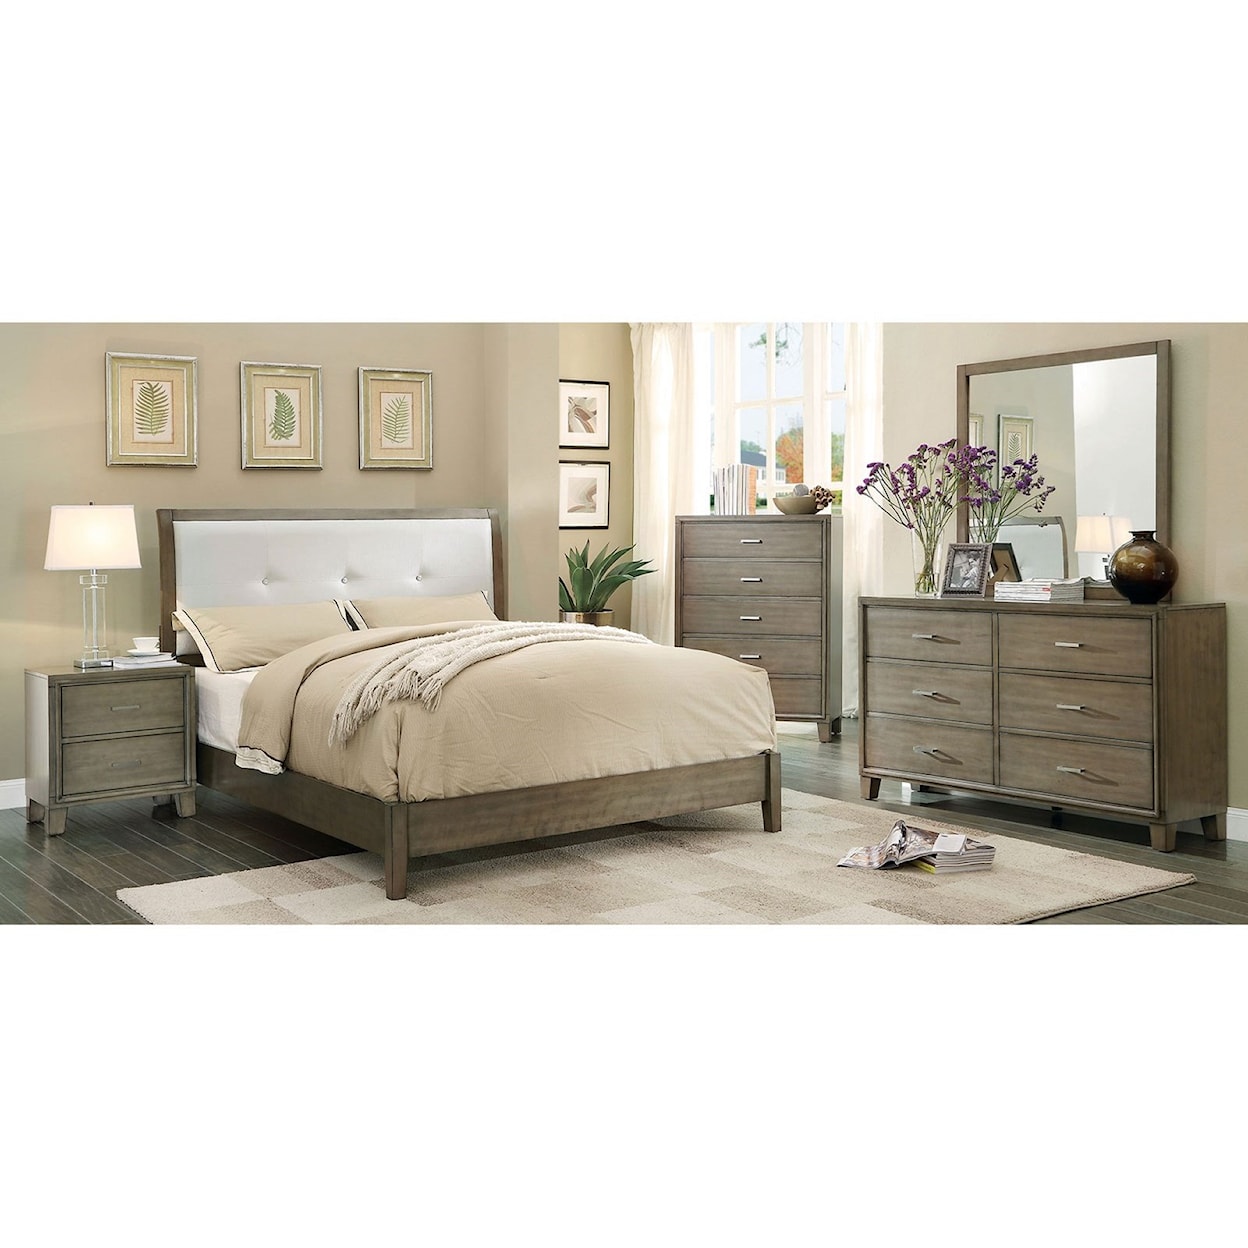 Furniture of America - FOA Enrico I Queen Bedroom Group